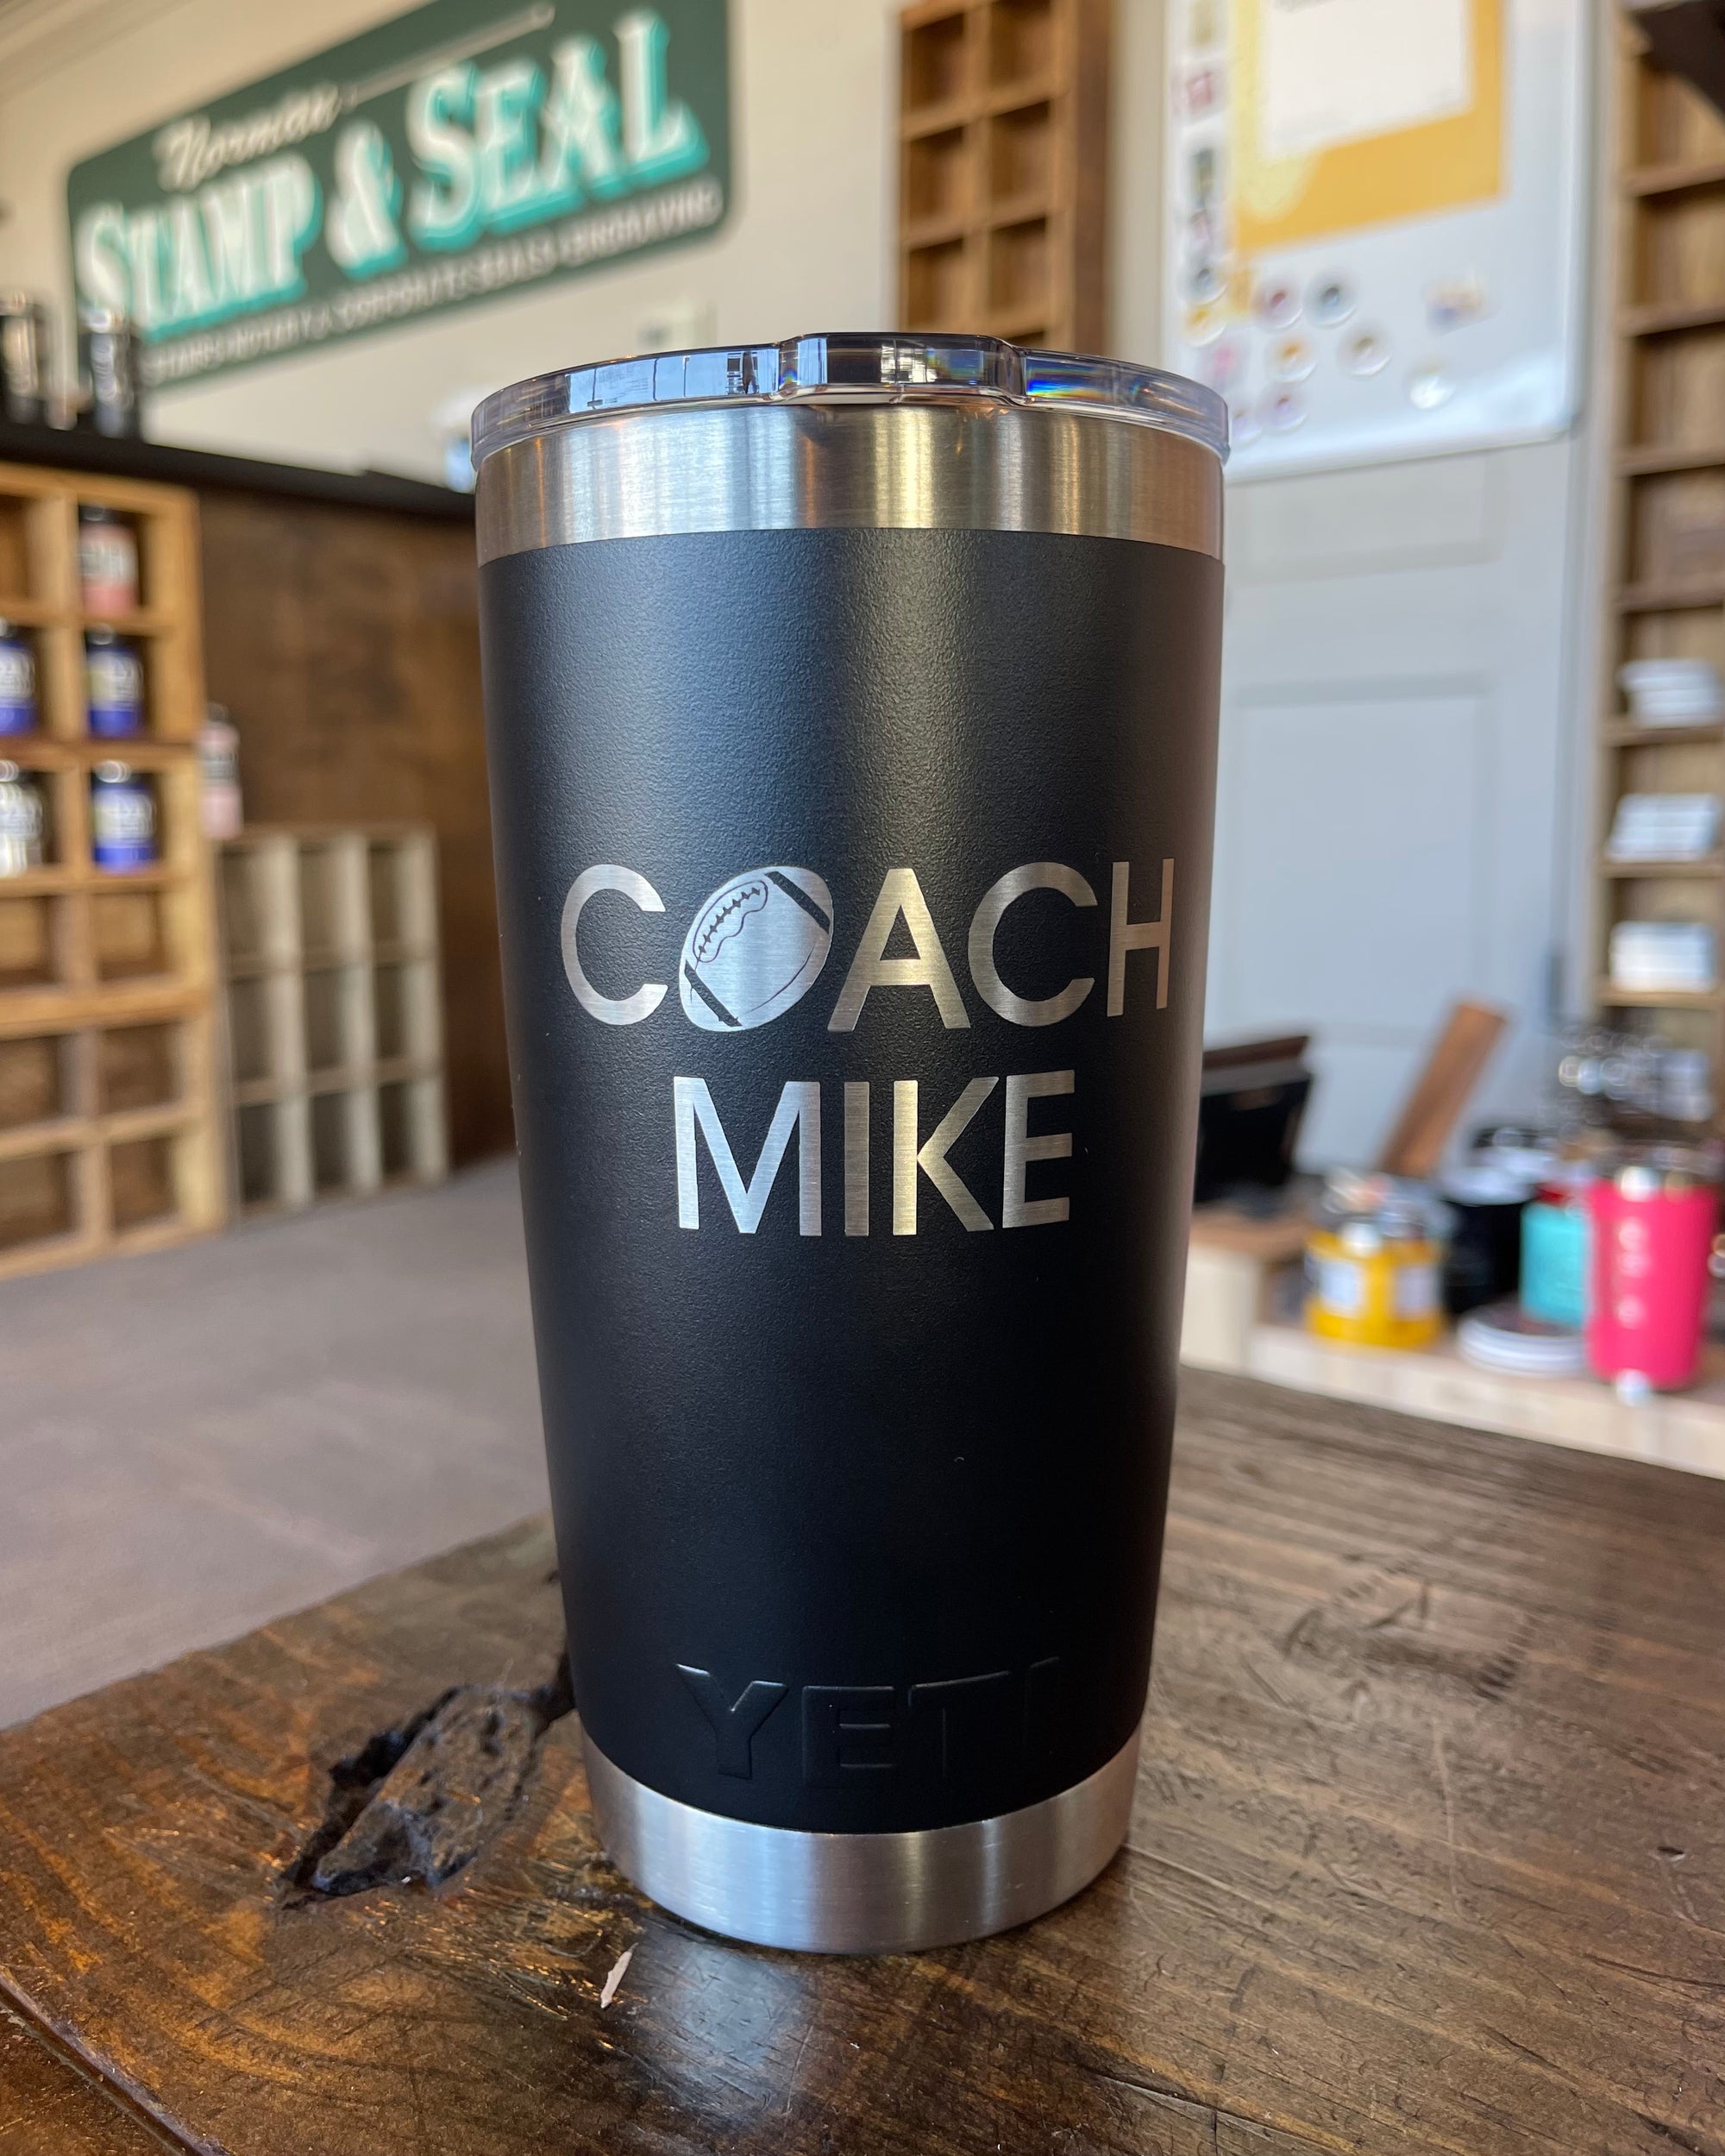  YETI - Personalized BASKETBALL Coach or Player Gift, Laser Engraved  Tumblers and Bottles, Multiple Sizes and Colors Available : Handmade  Products